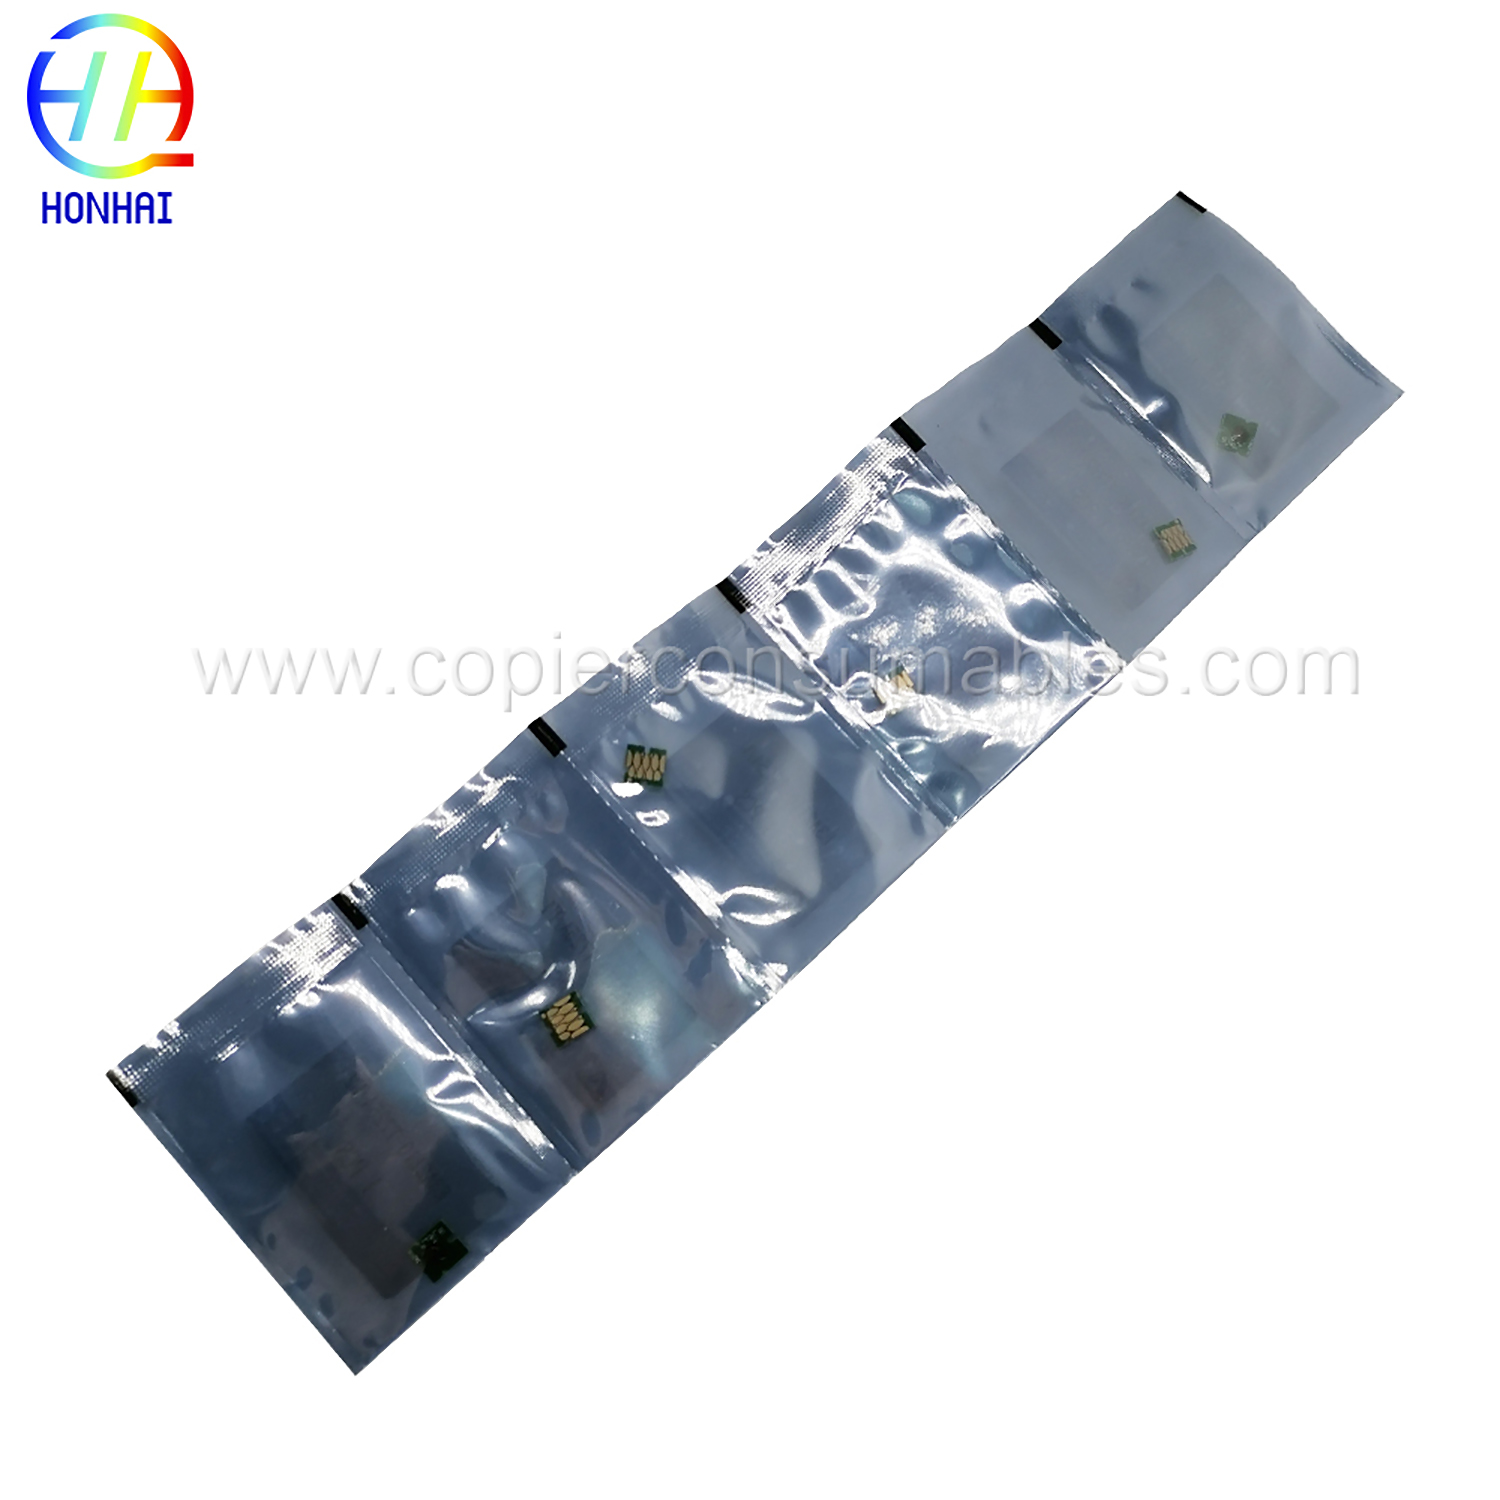 Refillalbe Ink Cartridge Chip For Epson F2000 F2100 F2130 (1) 拷贝